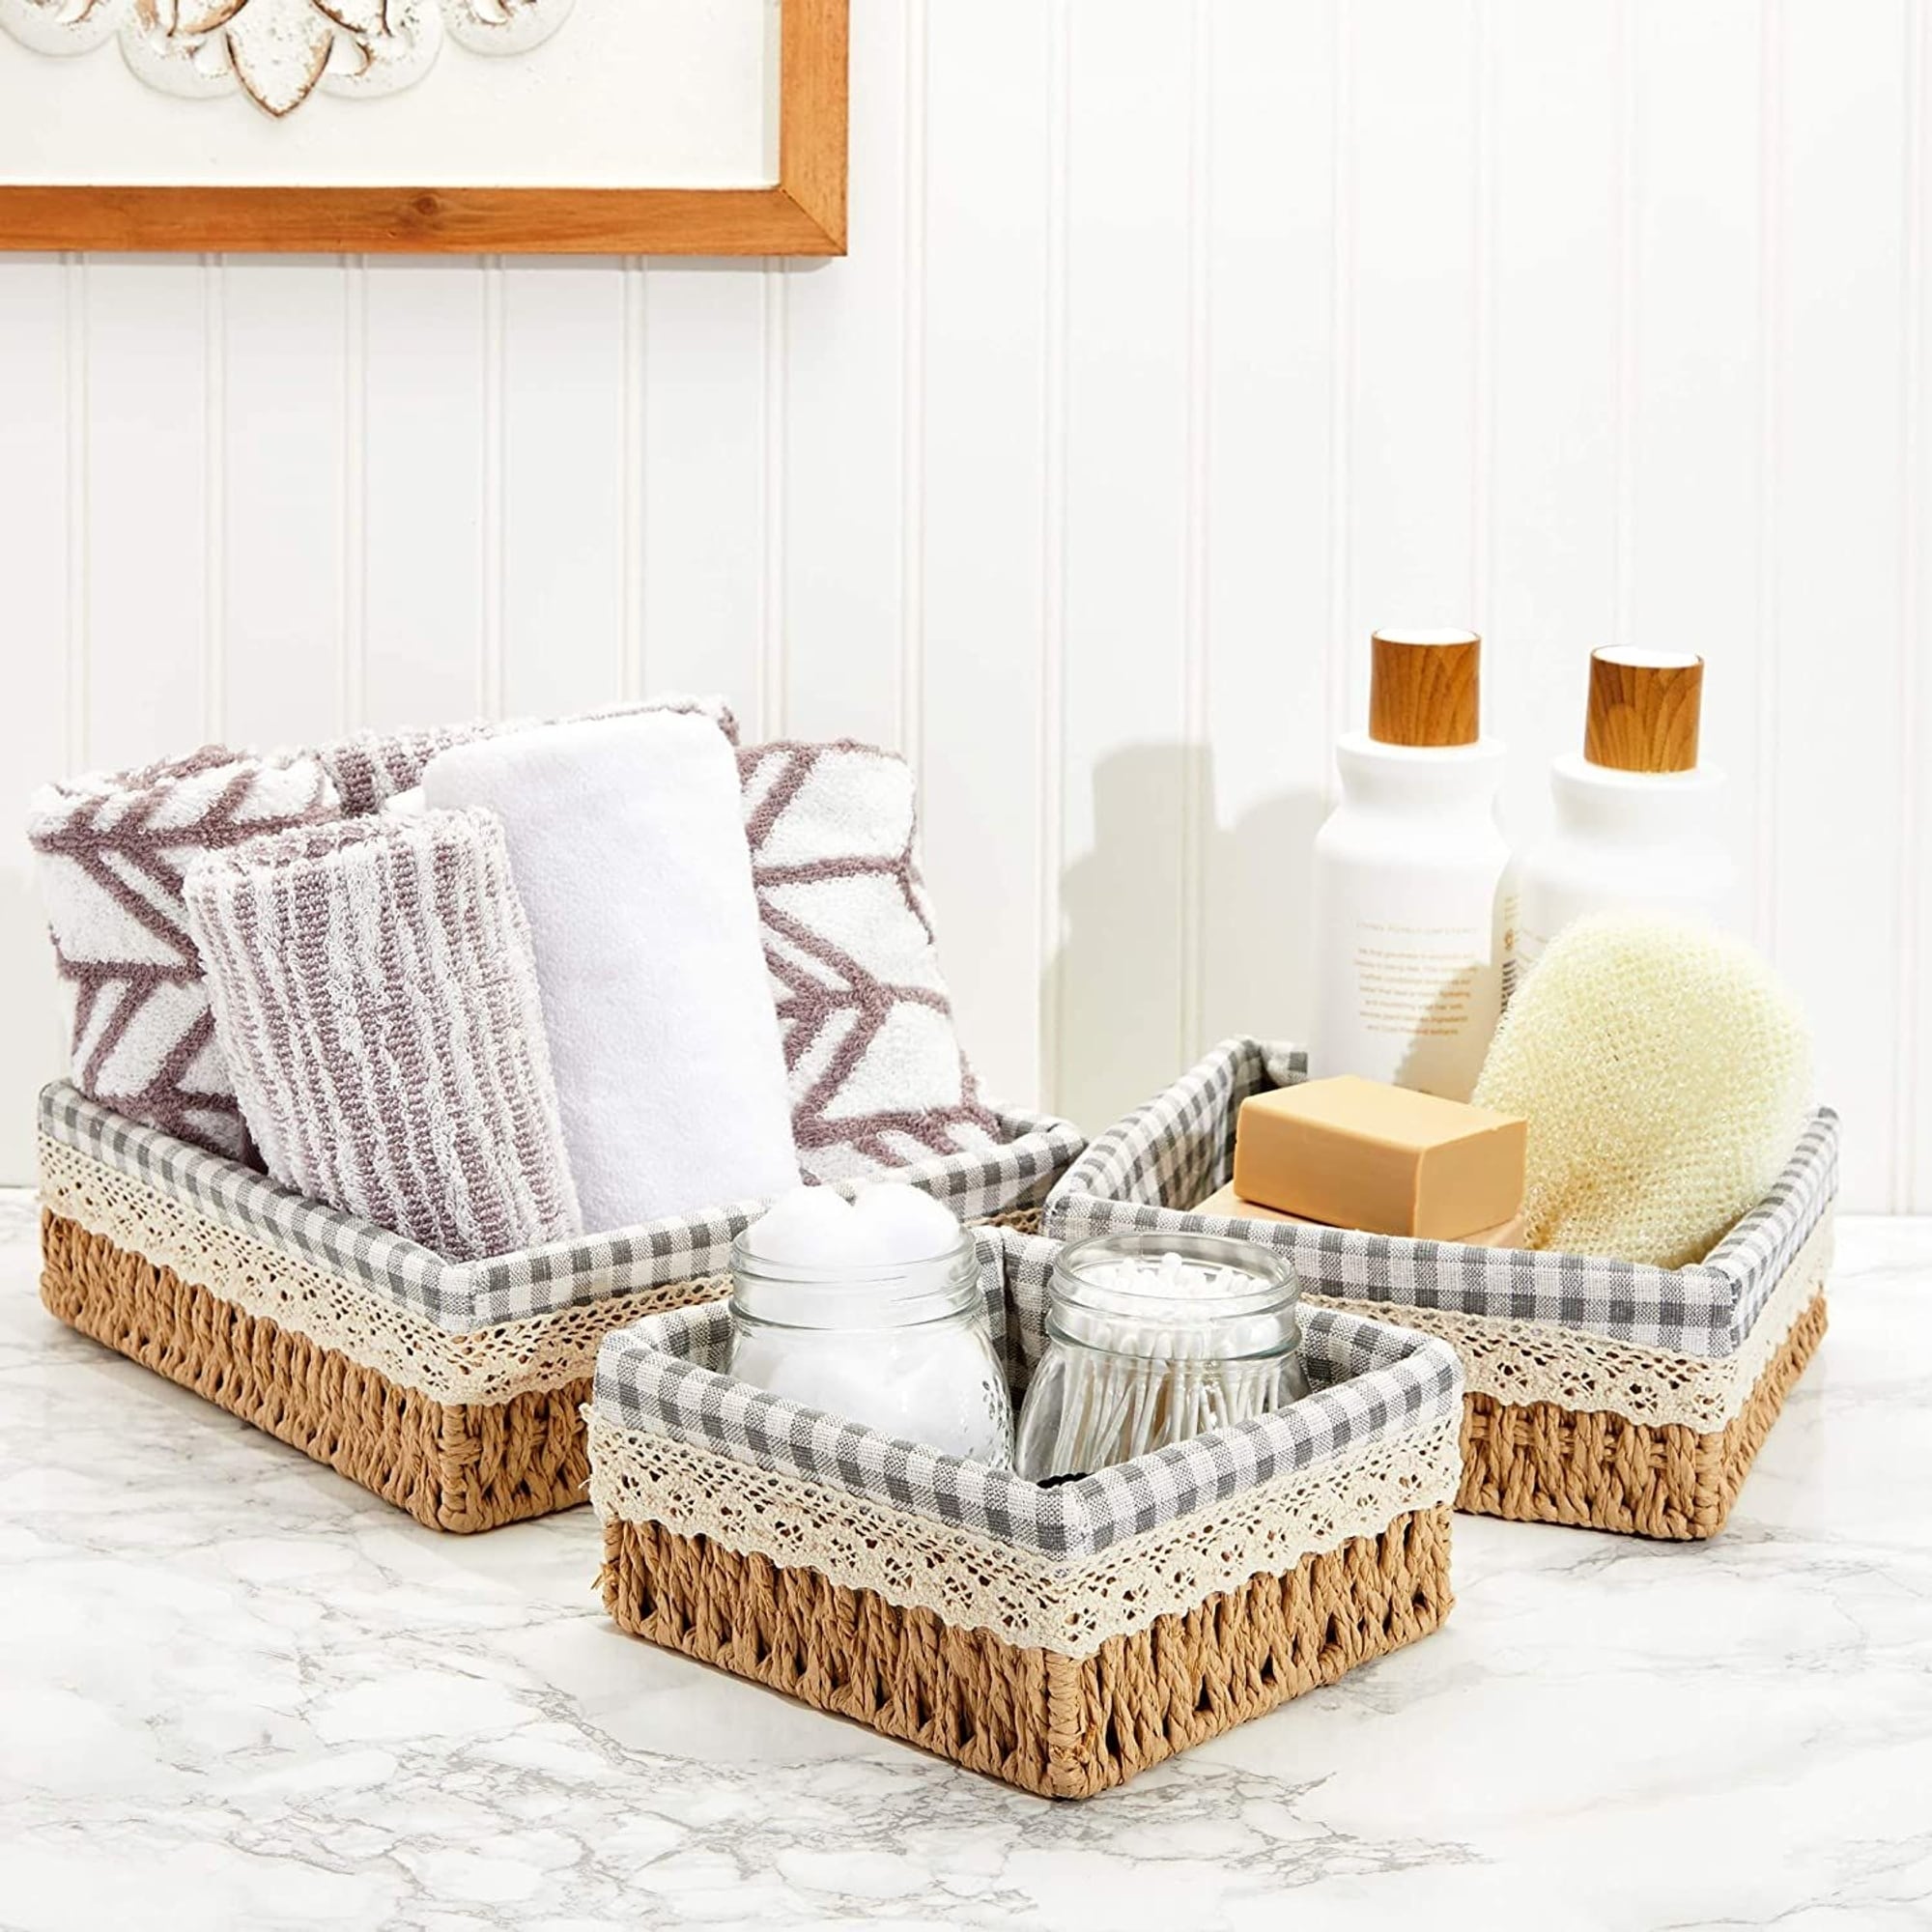 https://ak1.ostkcdn.com/images/products/is/images/direct/3e0b913427324e270ed2b122b264f8e9dfb05874/Farmlyn-Creek-Woven-Wicker-Storage-Baskets-with-Removable-Liner-%283-Sizes%2C-3-Pack%29.jpg